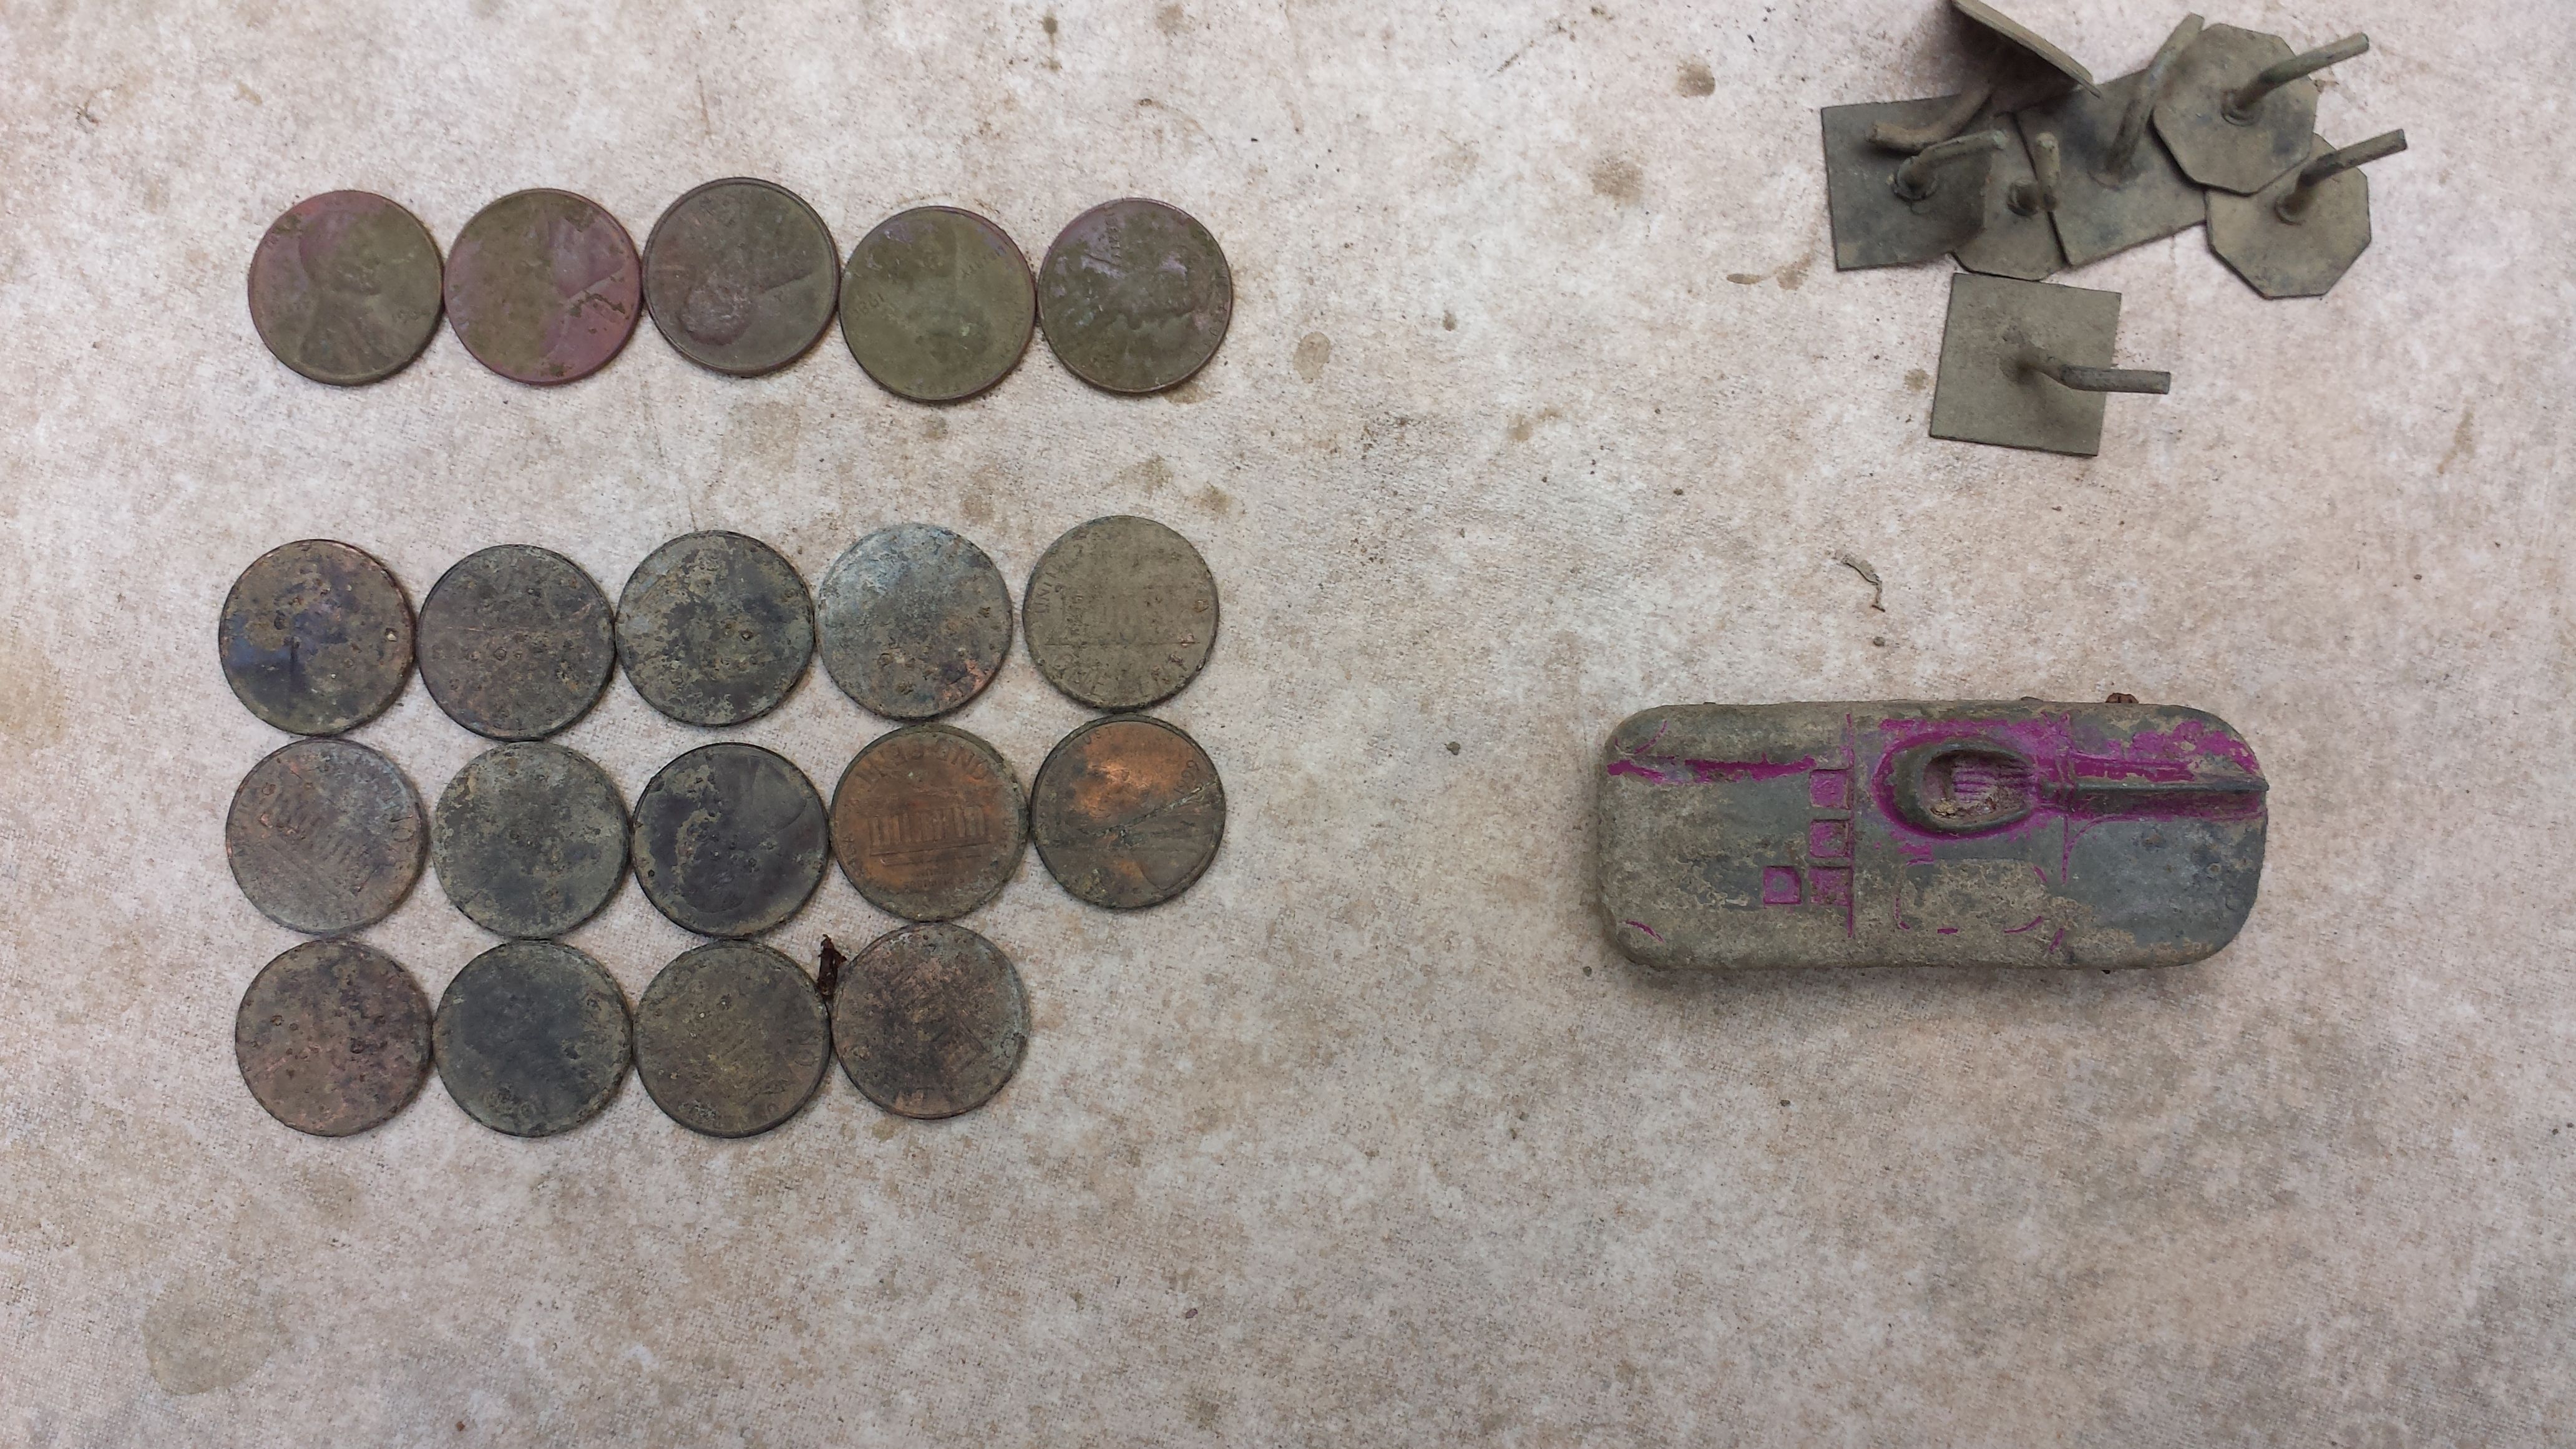 20150515 170326  NW House site at  the landfill with Kirk  19 cent cache.   
1.5 hr  $.019